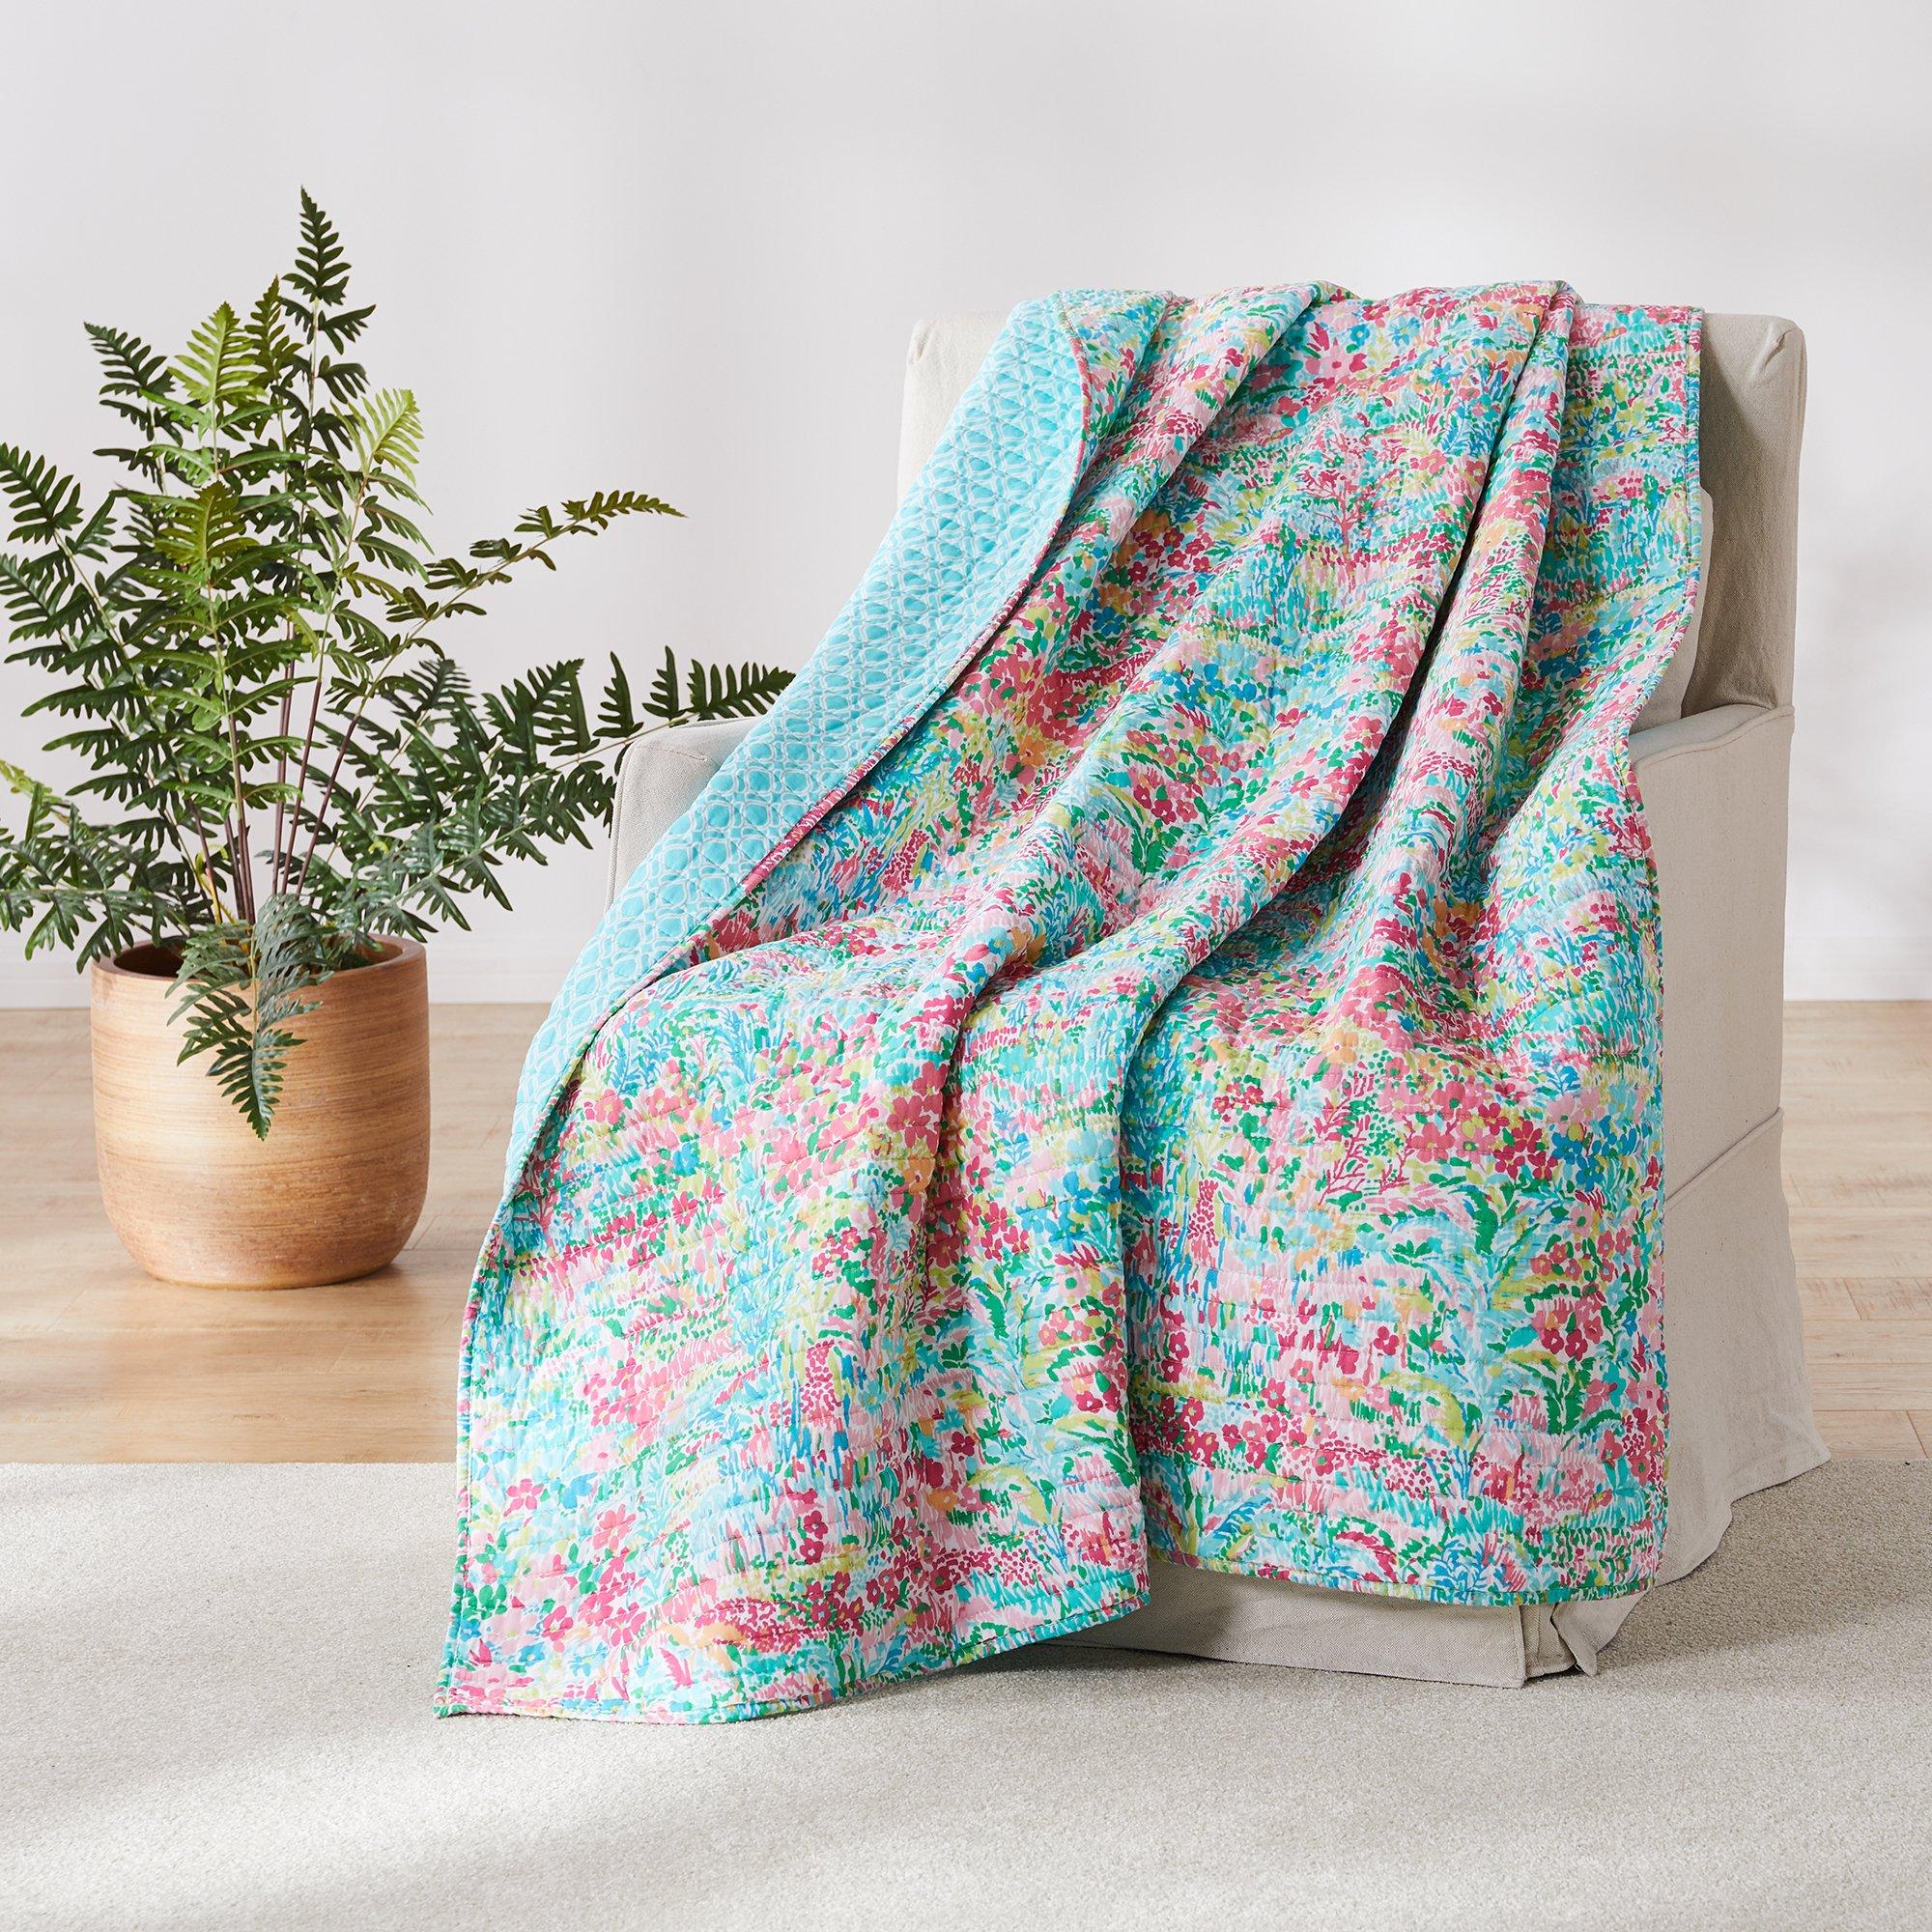 Photos - Other interior and decor Levtex Home Karola Ditsy Floral Quilted Throw